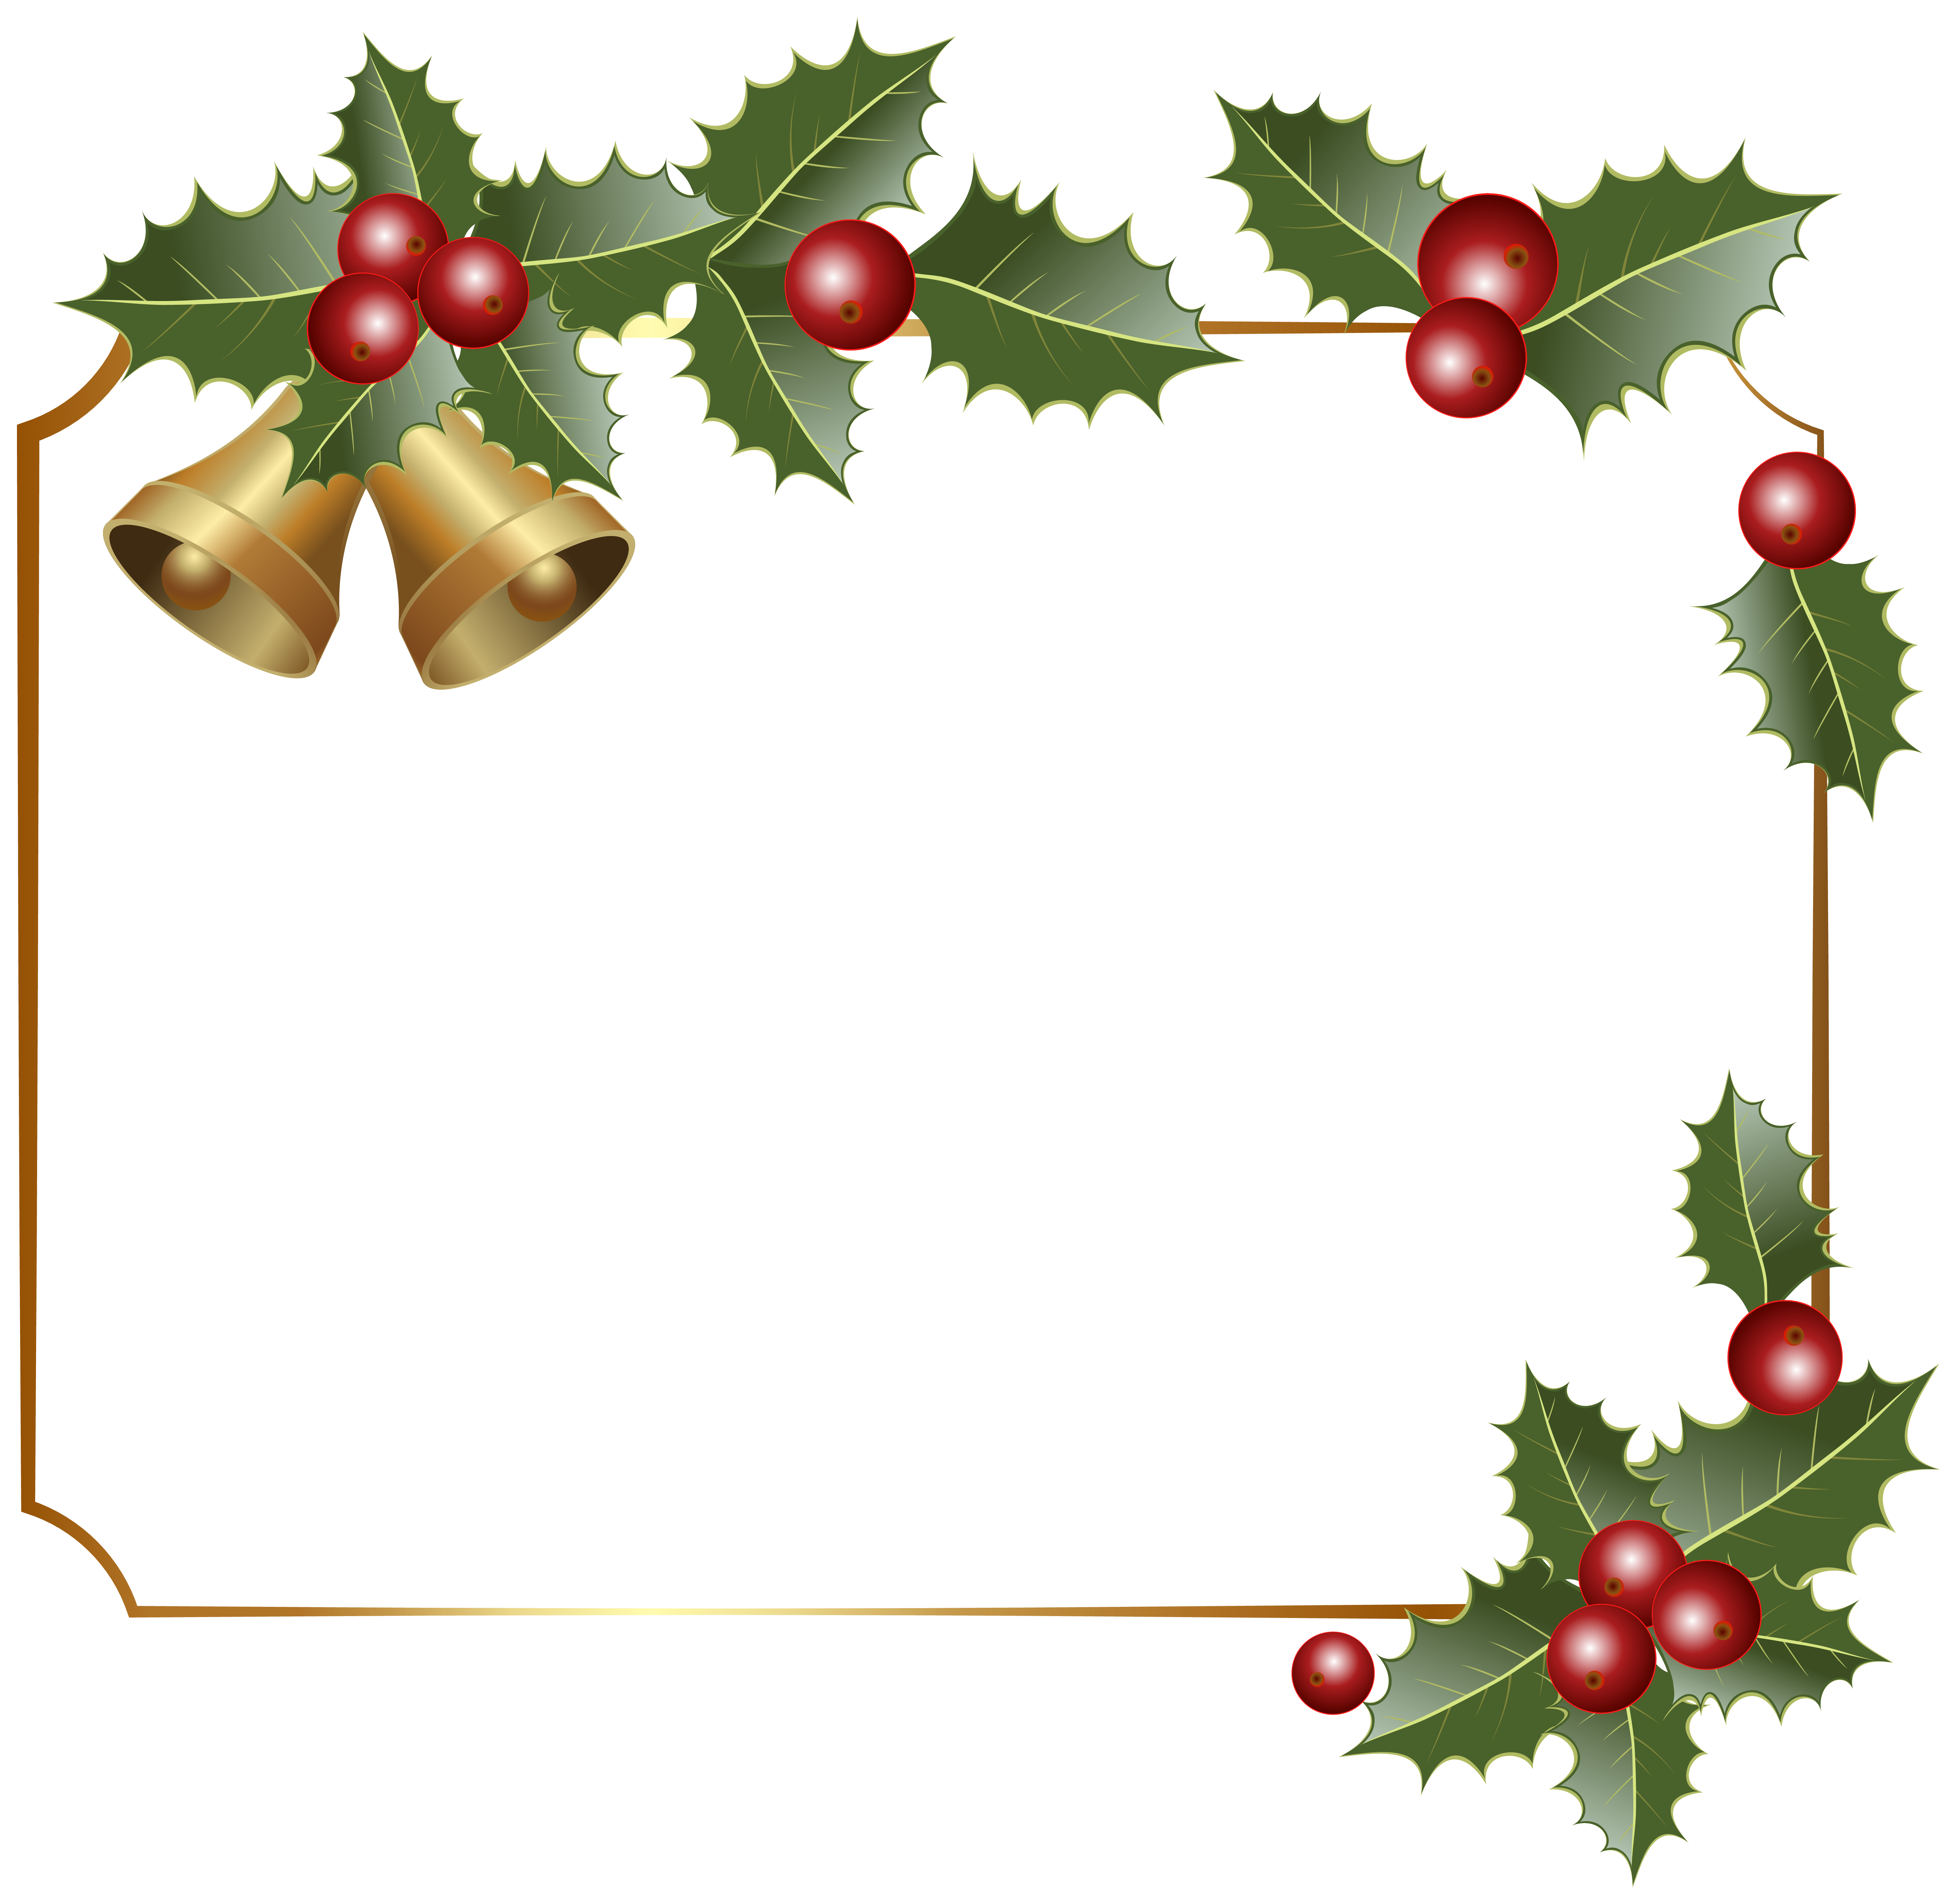 Decor with bells clipart. Christmas holly border png